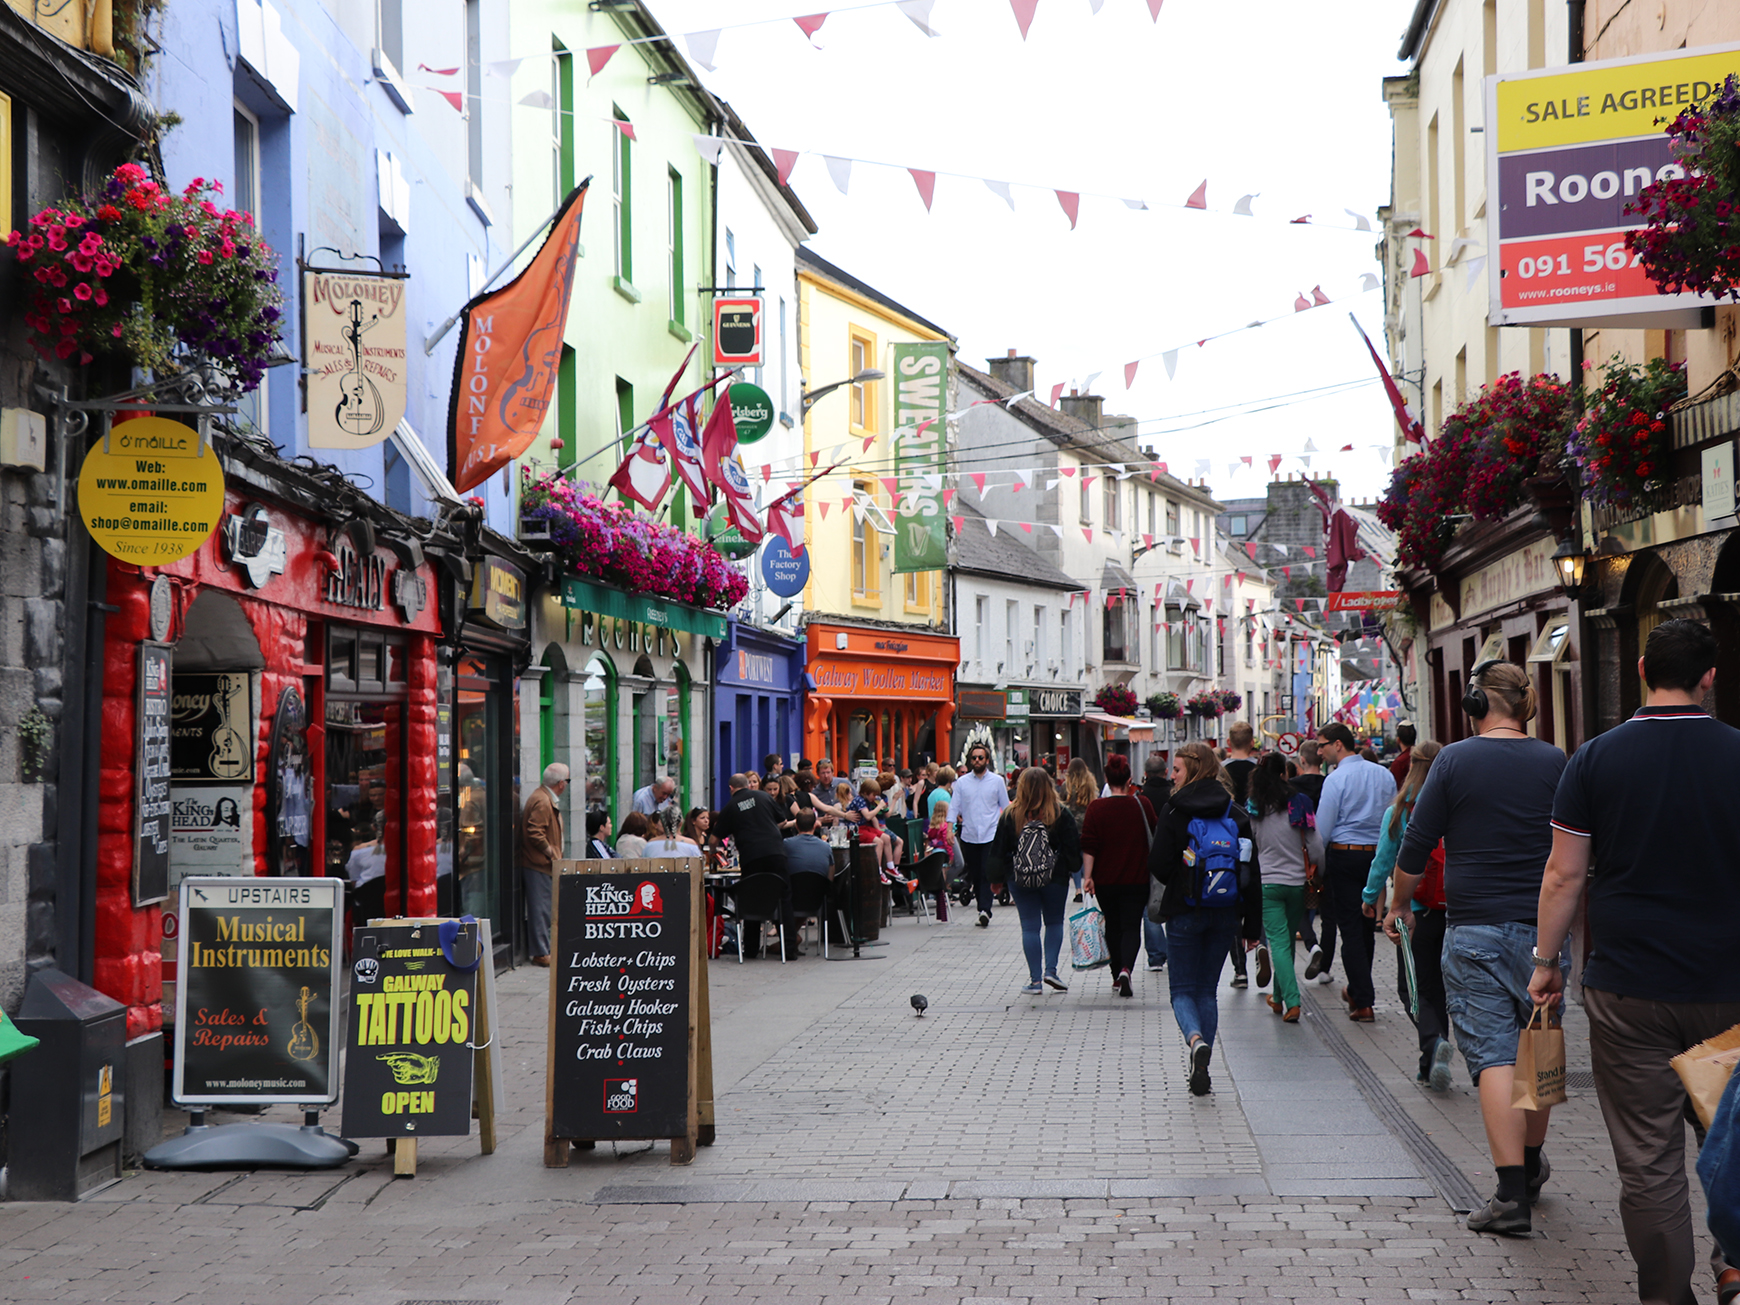 Study abroad in Ireland with IFSA